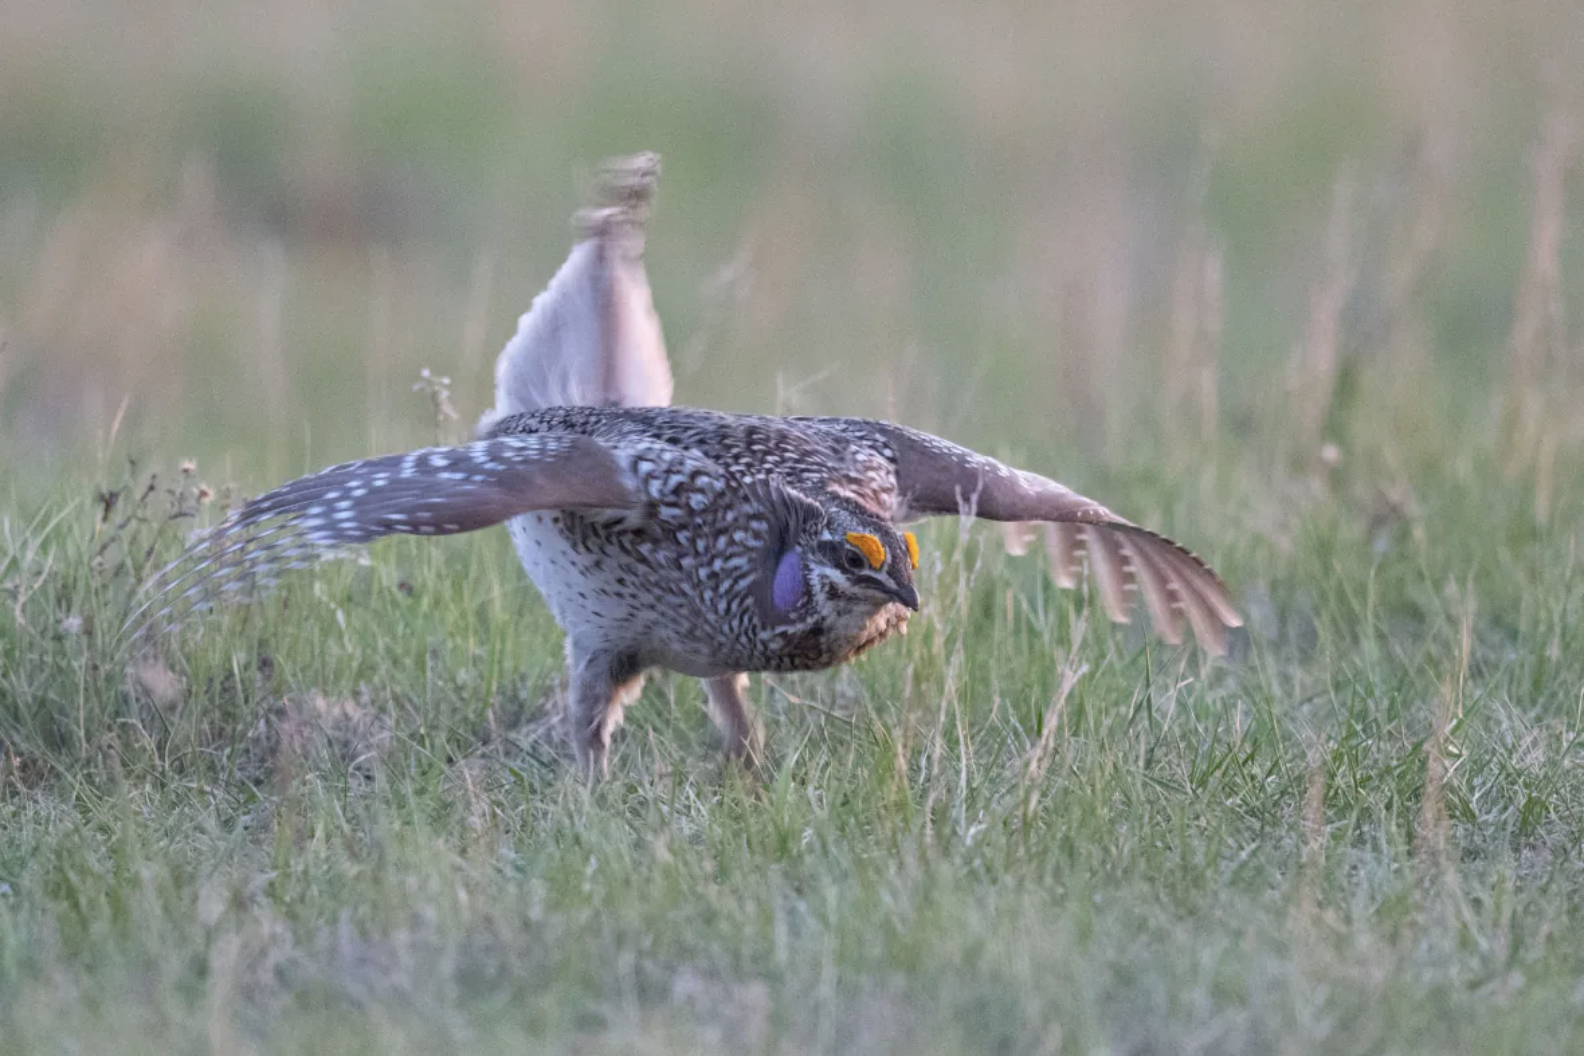 (Jason Bantle/Nature Conservancy of Canada) A sharp-tailed grouse at the NCC’s Mackie Ranch property. (Jason Bantle/Nature Conservancy of Canada)